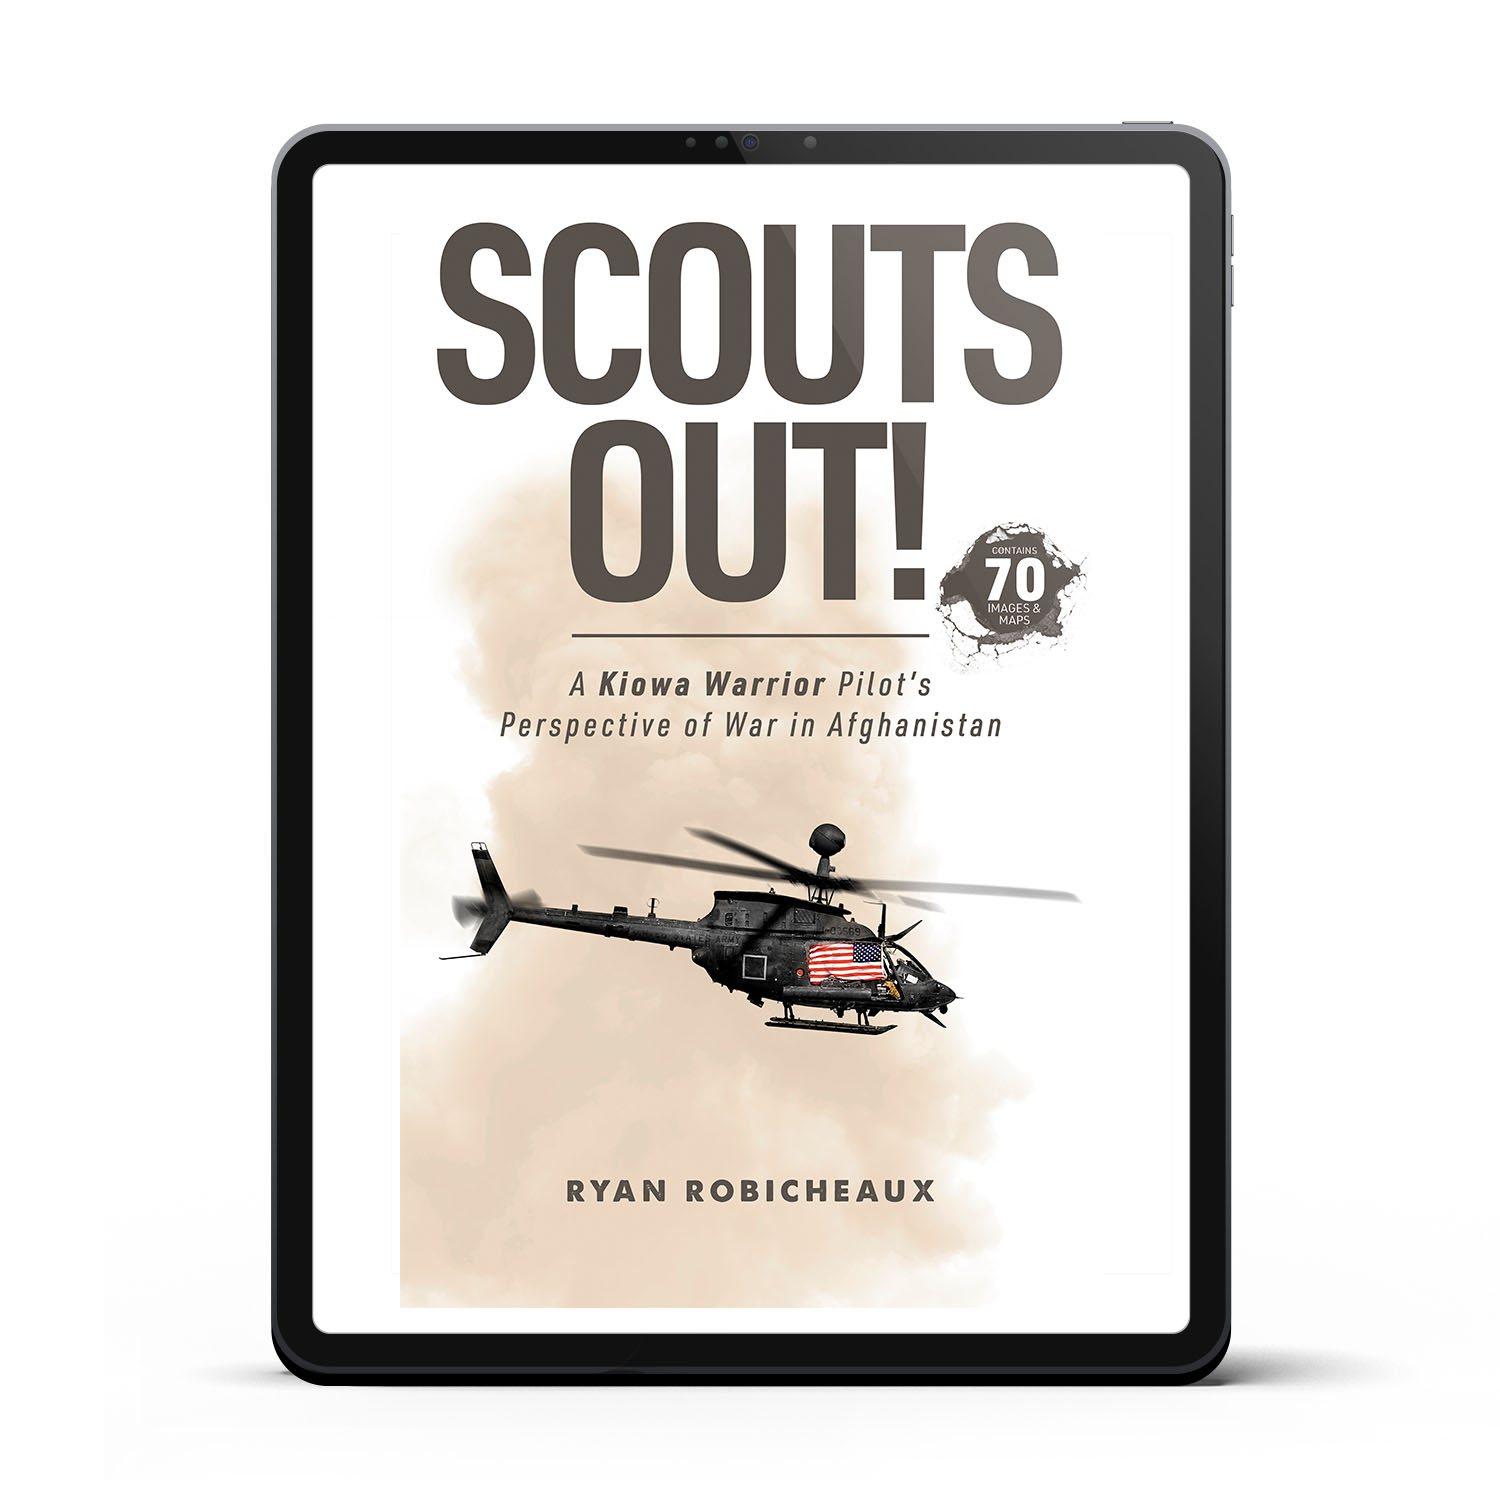 'Scouts Out!' is an immersive, first-hand memoir from the frontlines of the US war in Afghanistan. The author is Ryan Robicheaux. The book cover and interior were designed by Mark Thomas of coverness.com. To find out more about my book design services, please visit www.coverness.com